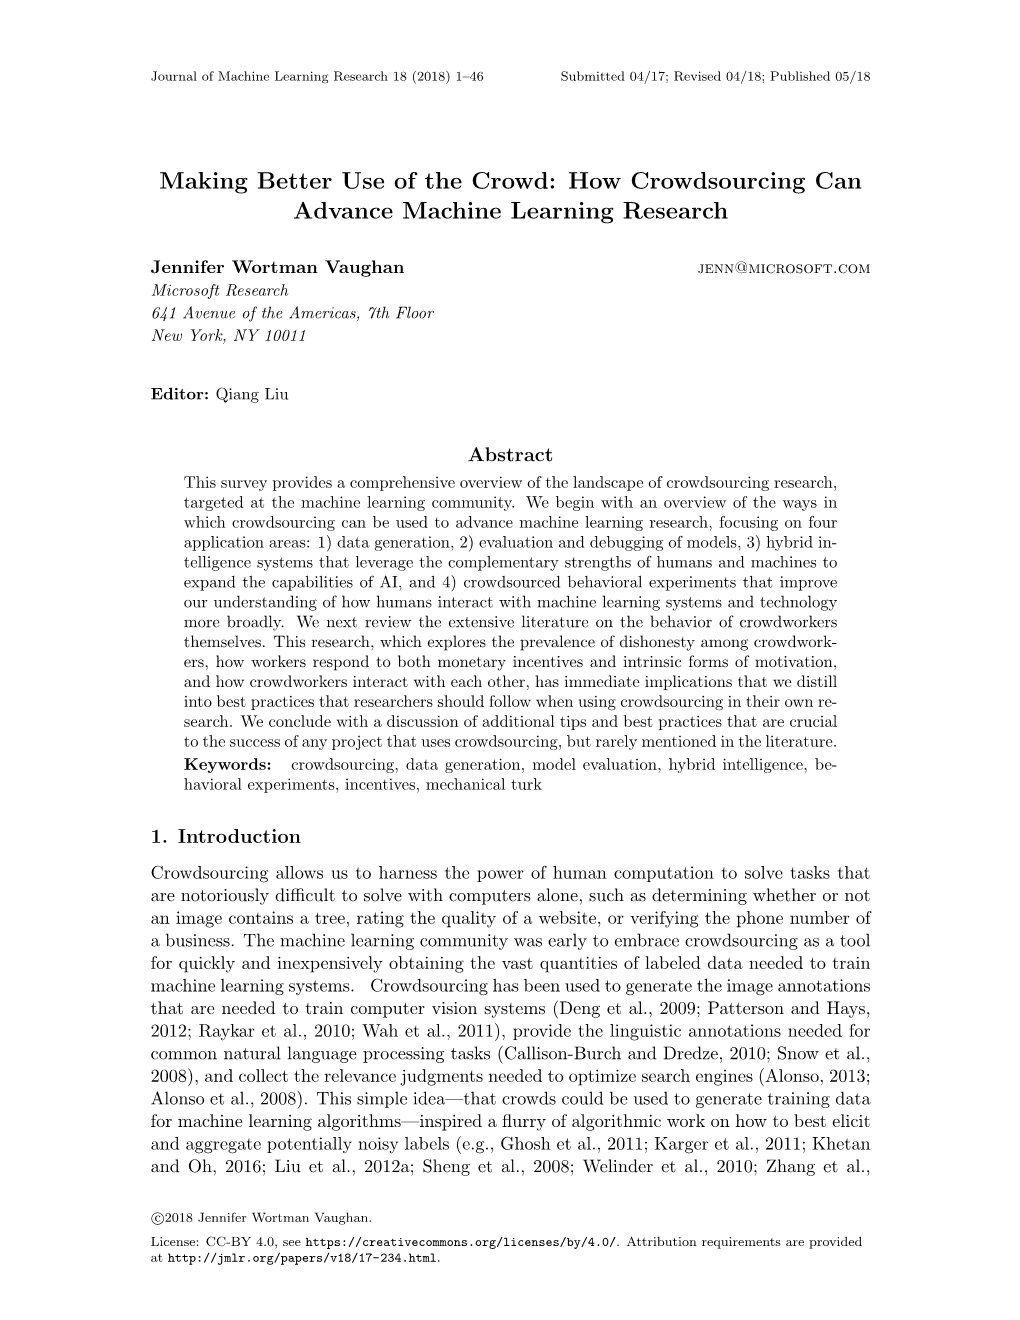 Making Better Use of the Crowd: How Crowdsourcing Can Advance Machine Learning Research